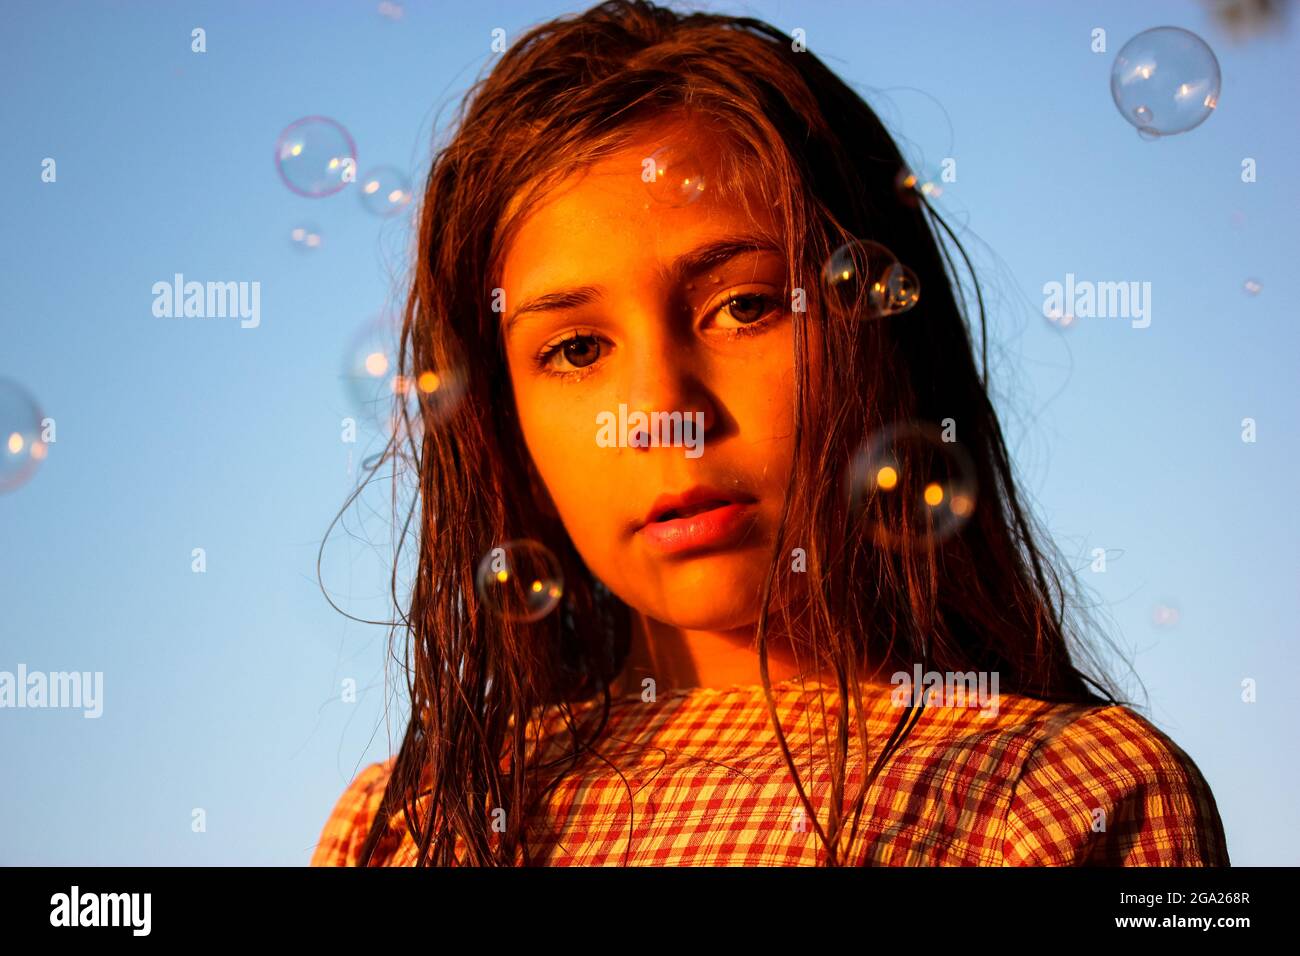 Beautiful teenage girl amidst soap bubbles flying in the air at a sunset. Portrait of a 10-12 years old kid. Schoolgirl on summer holiday. Entertainme Stock Photo